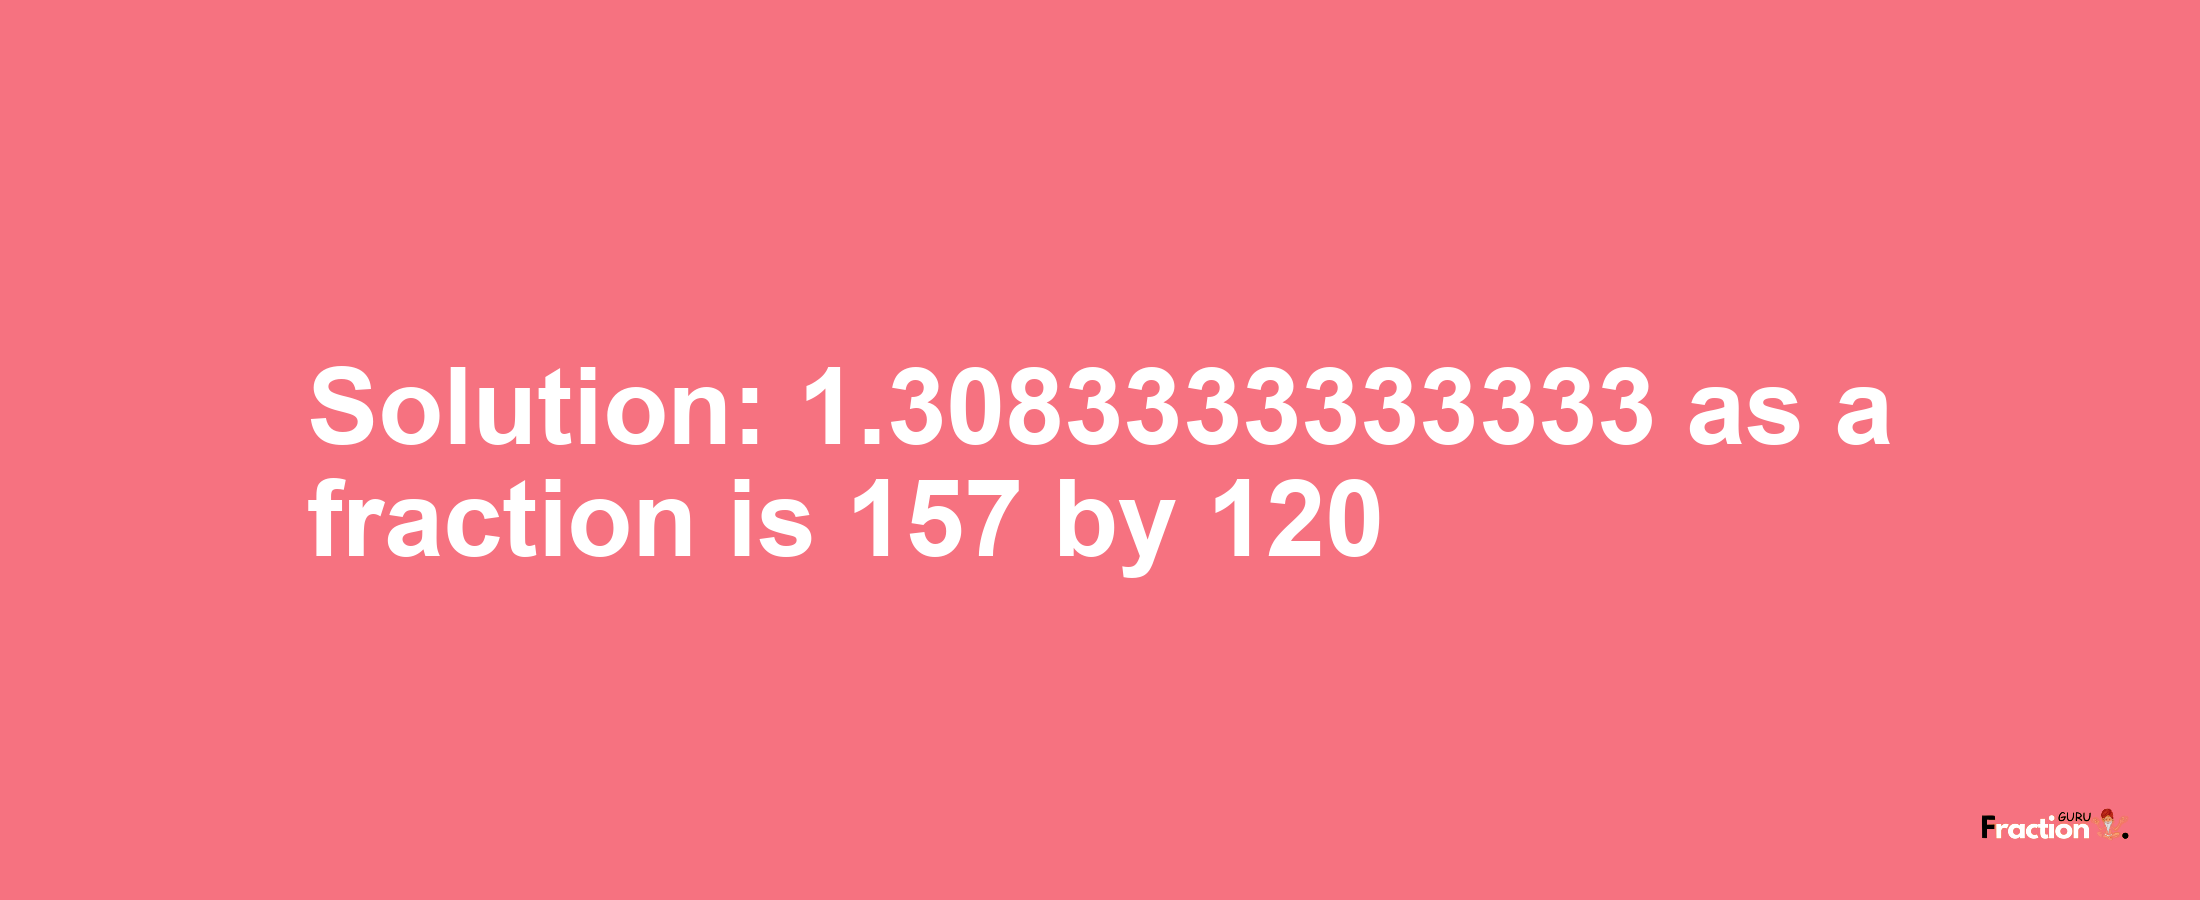 Solution:1.3083333333333 as a fraction is 157/120